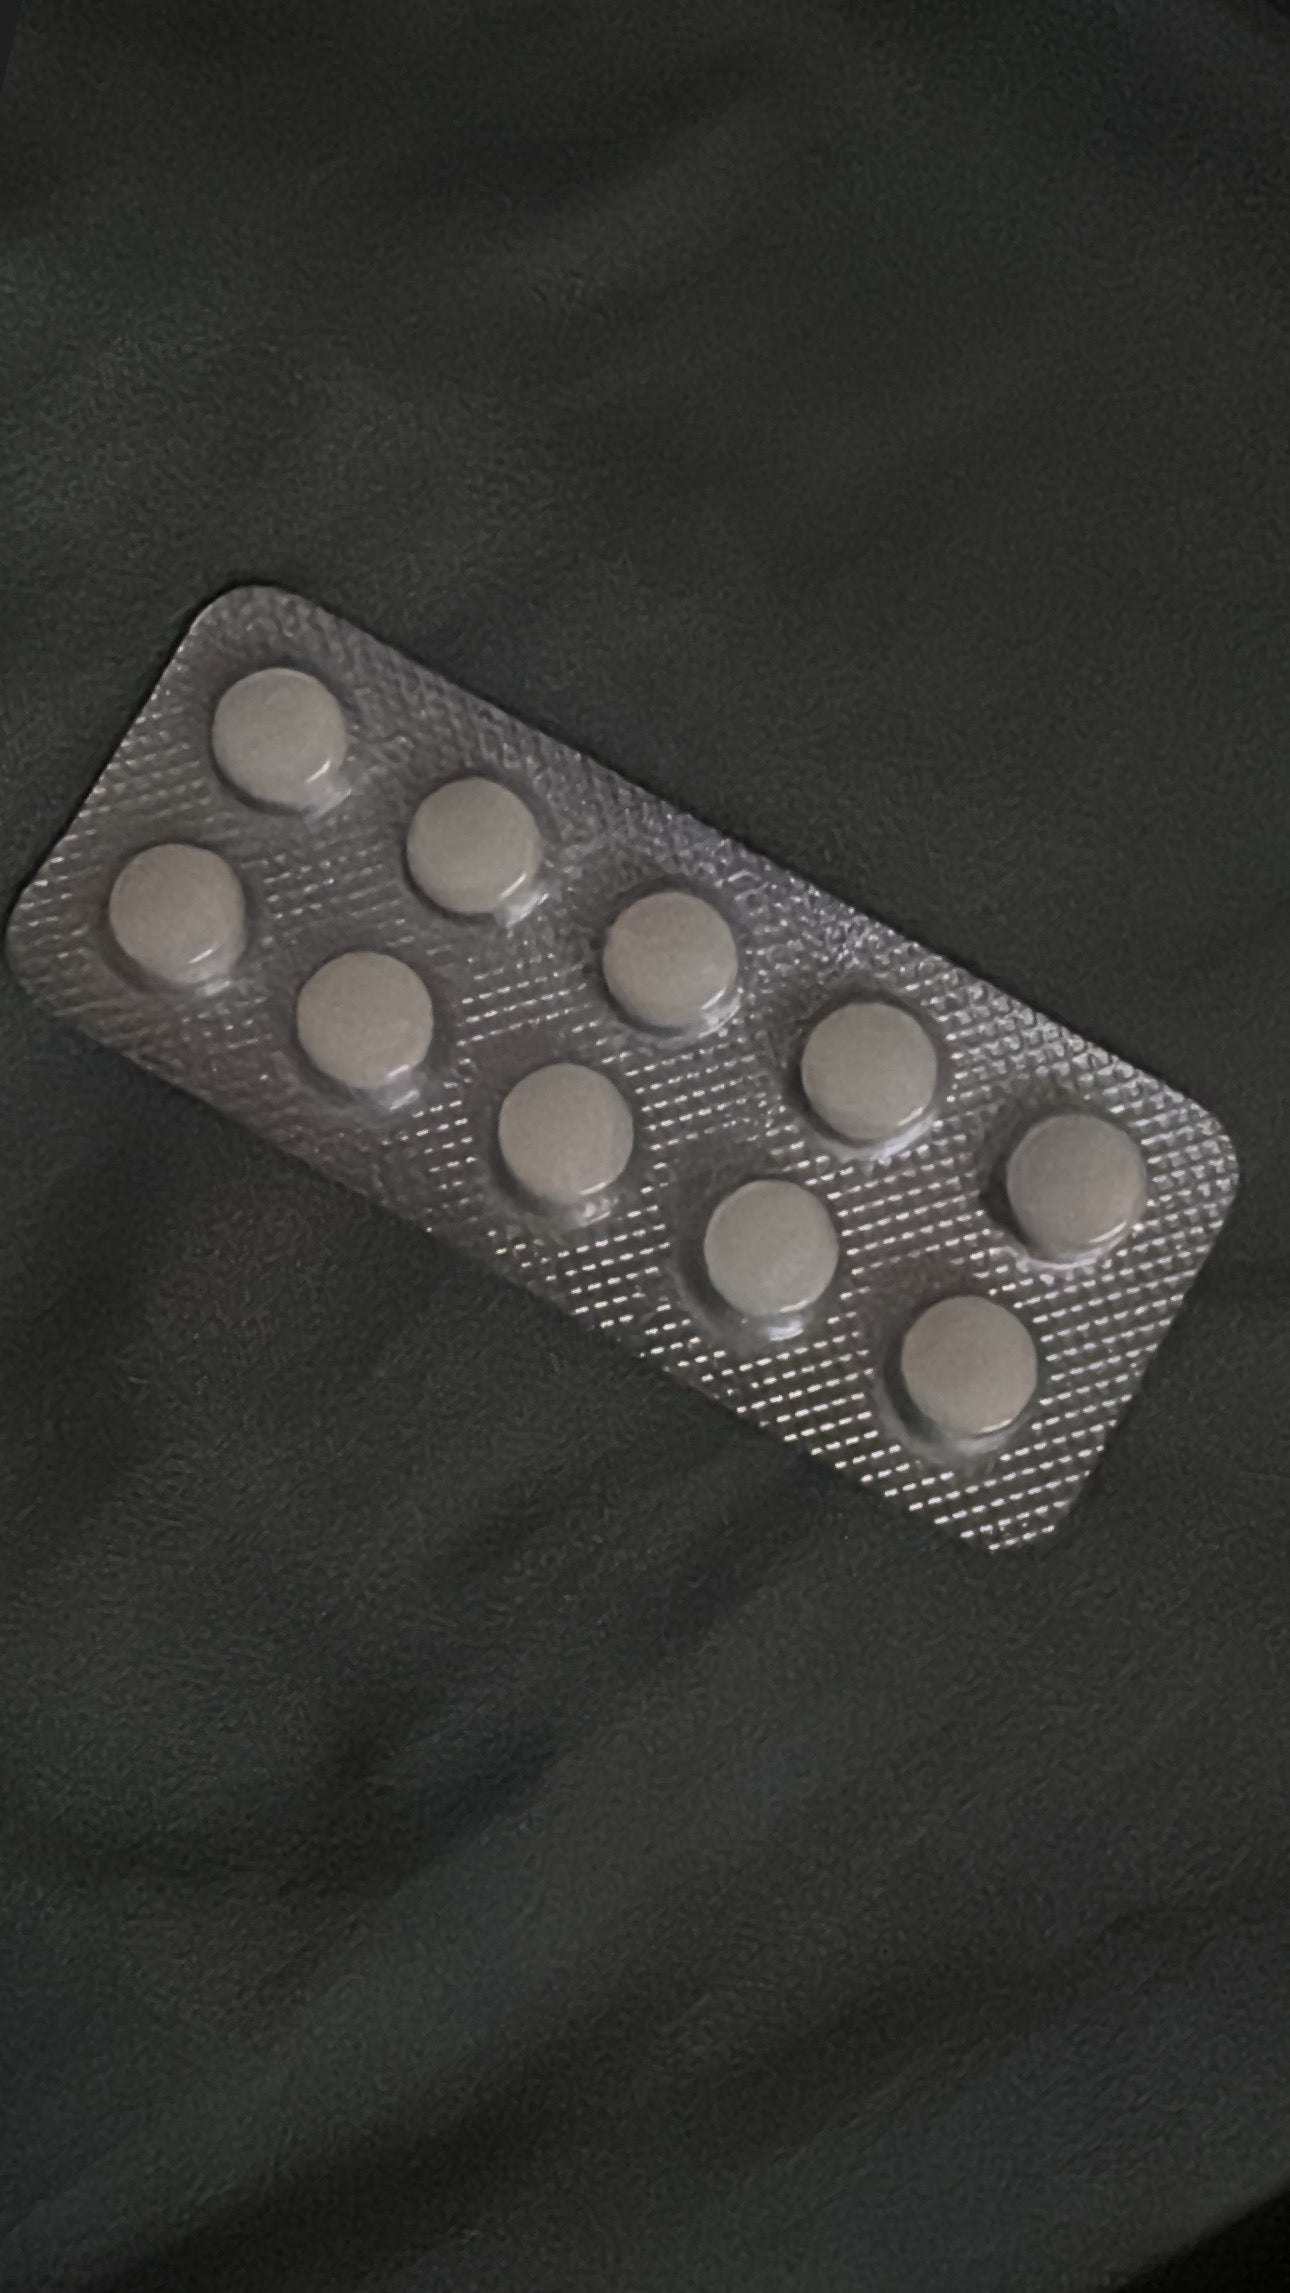 Zopiclone 3.5mg x 10 tablets in stock